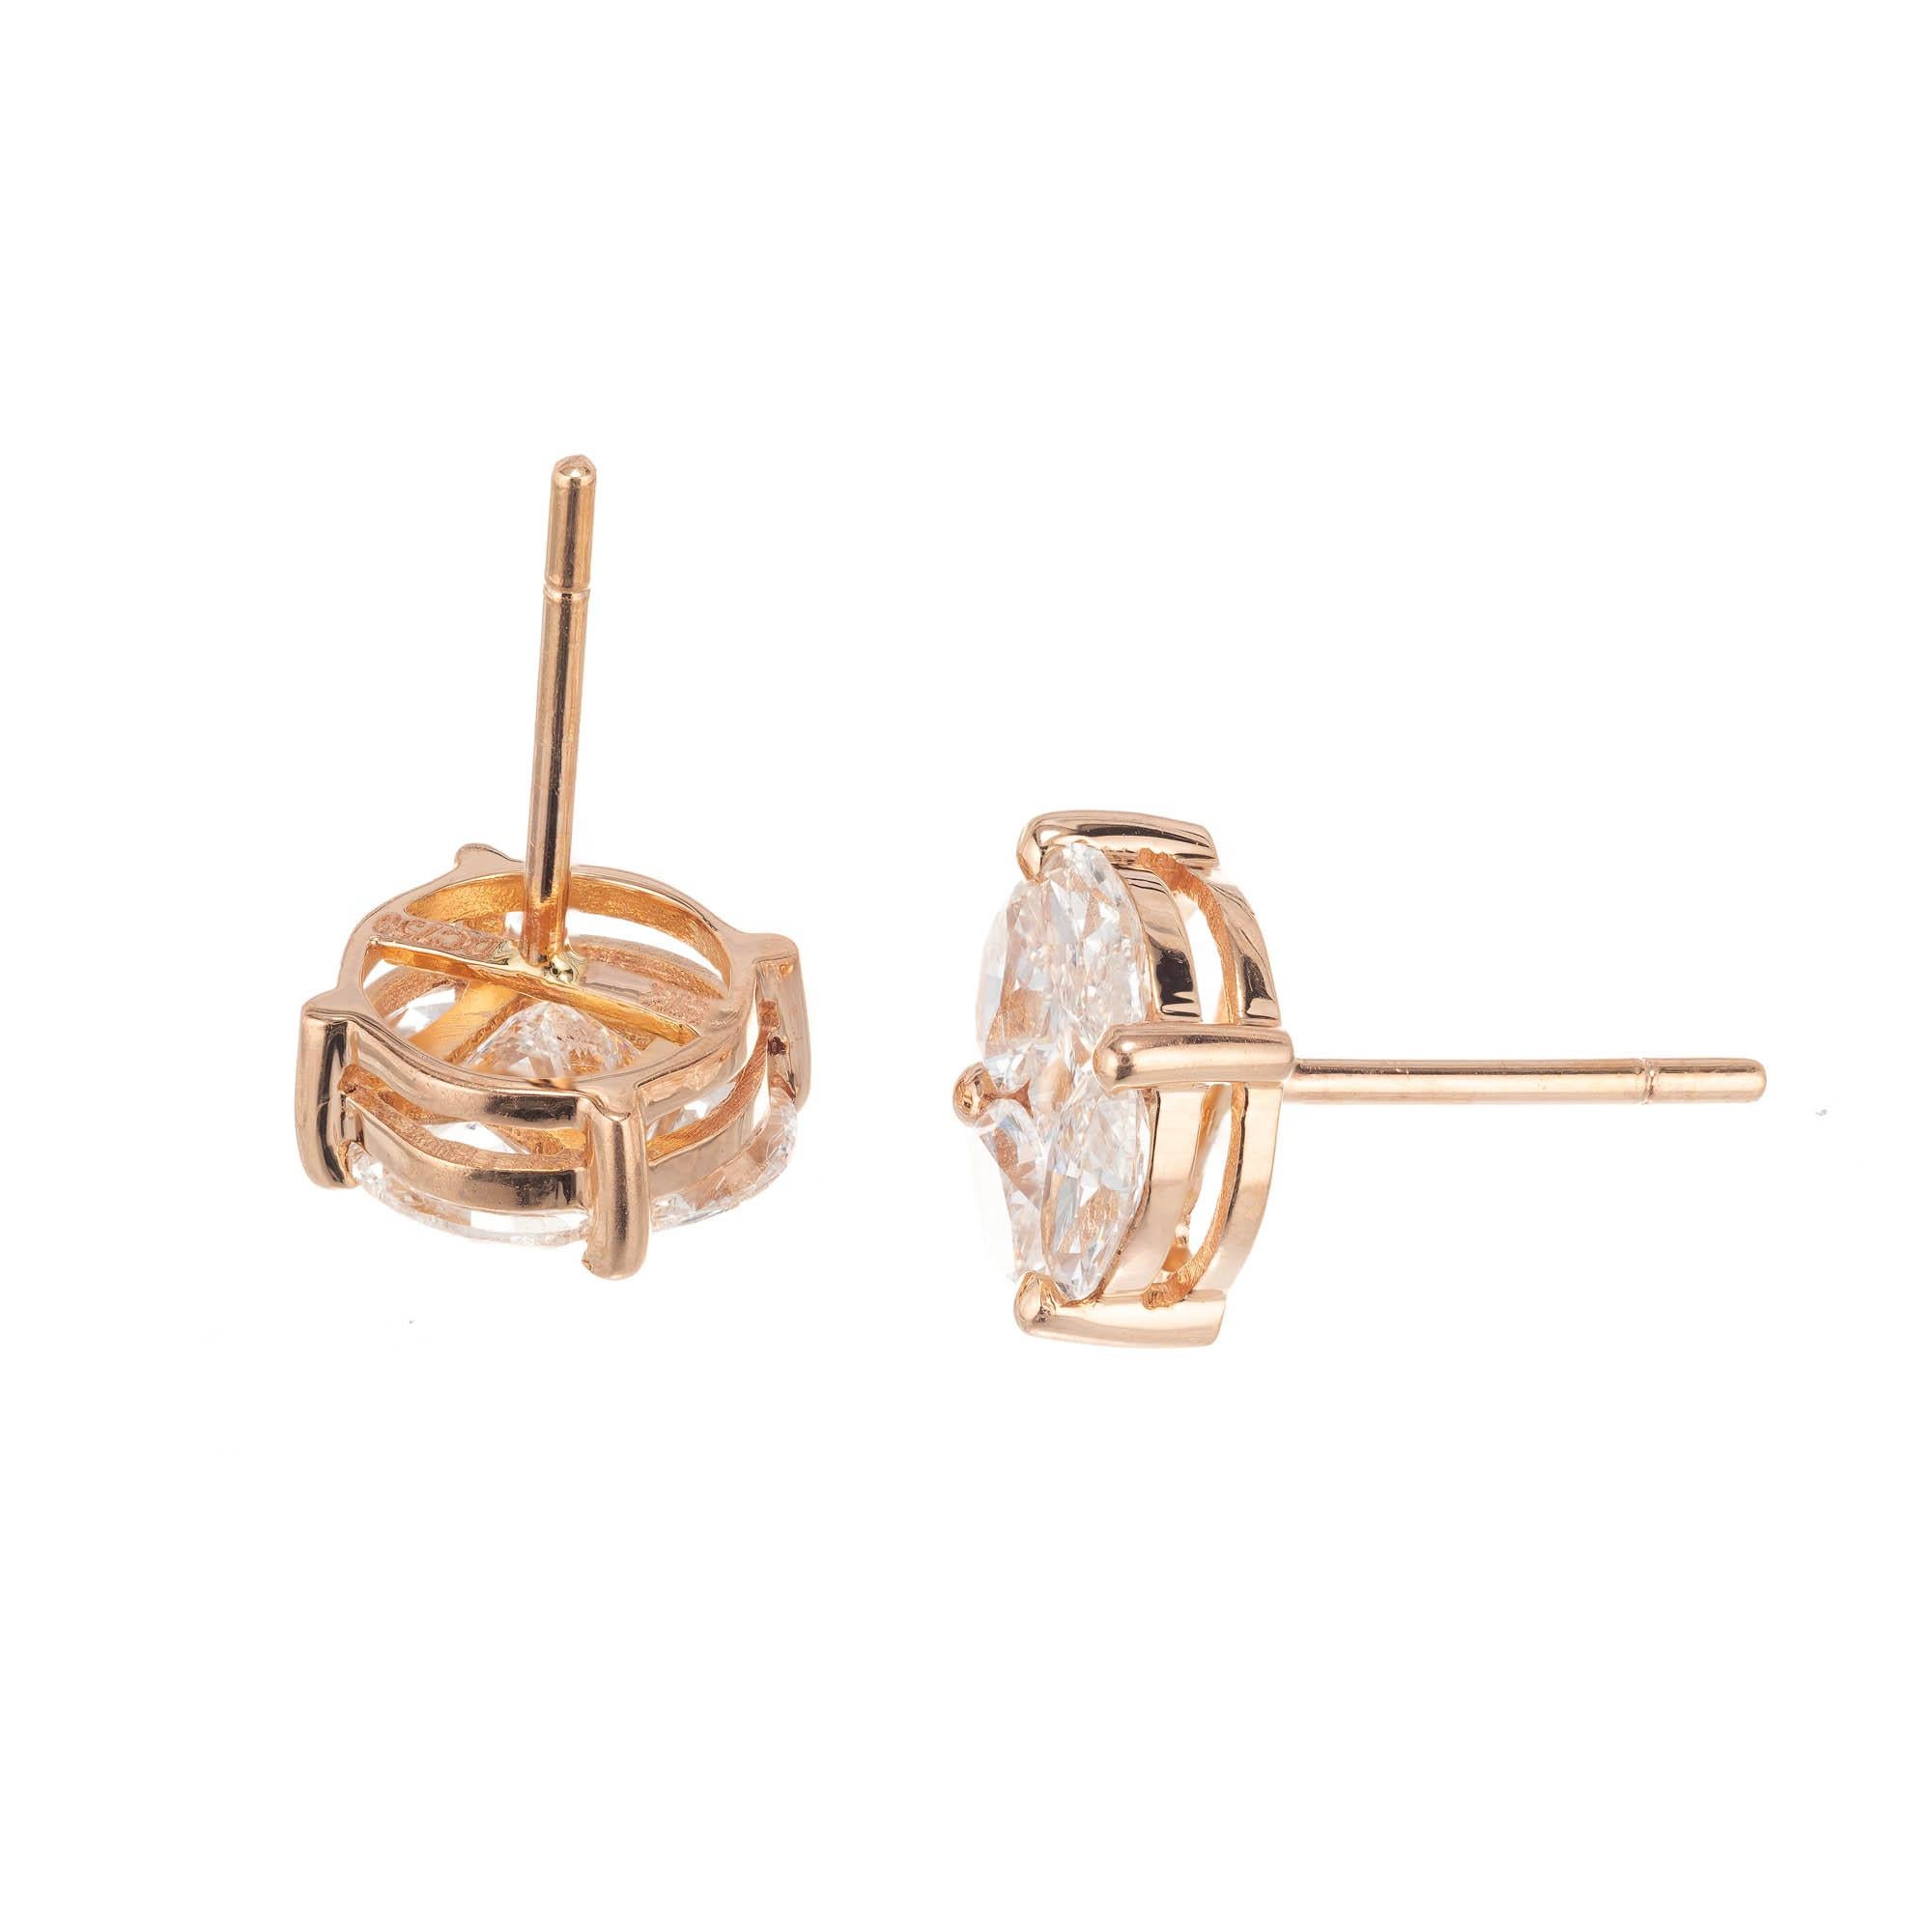 Marquise Cut 1.54 Carat Diamond Rose Gold Cluster Earrings